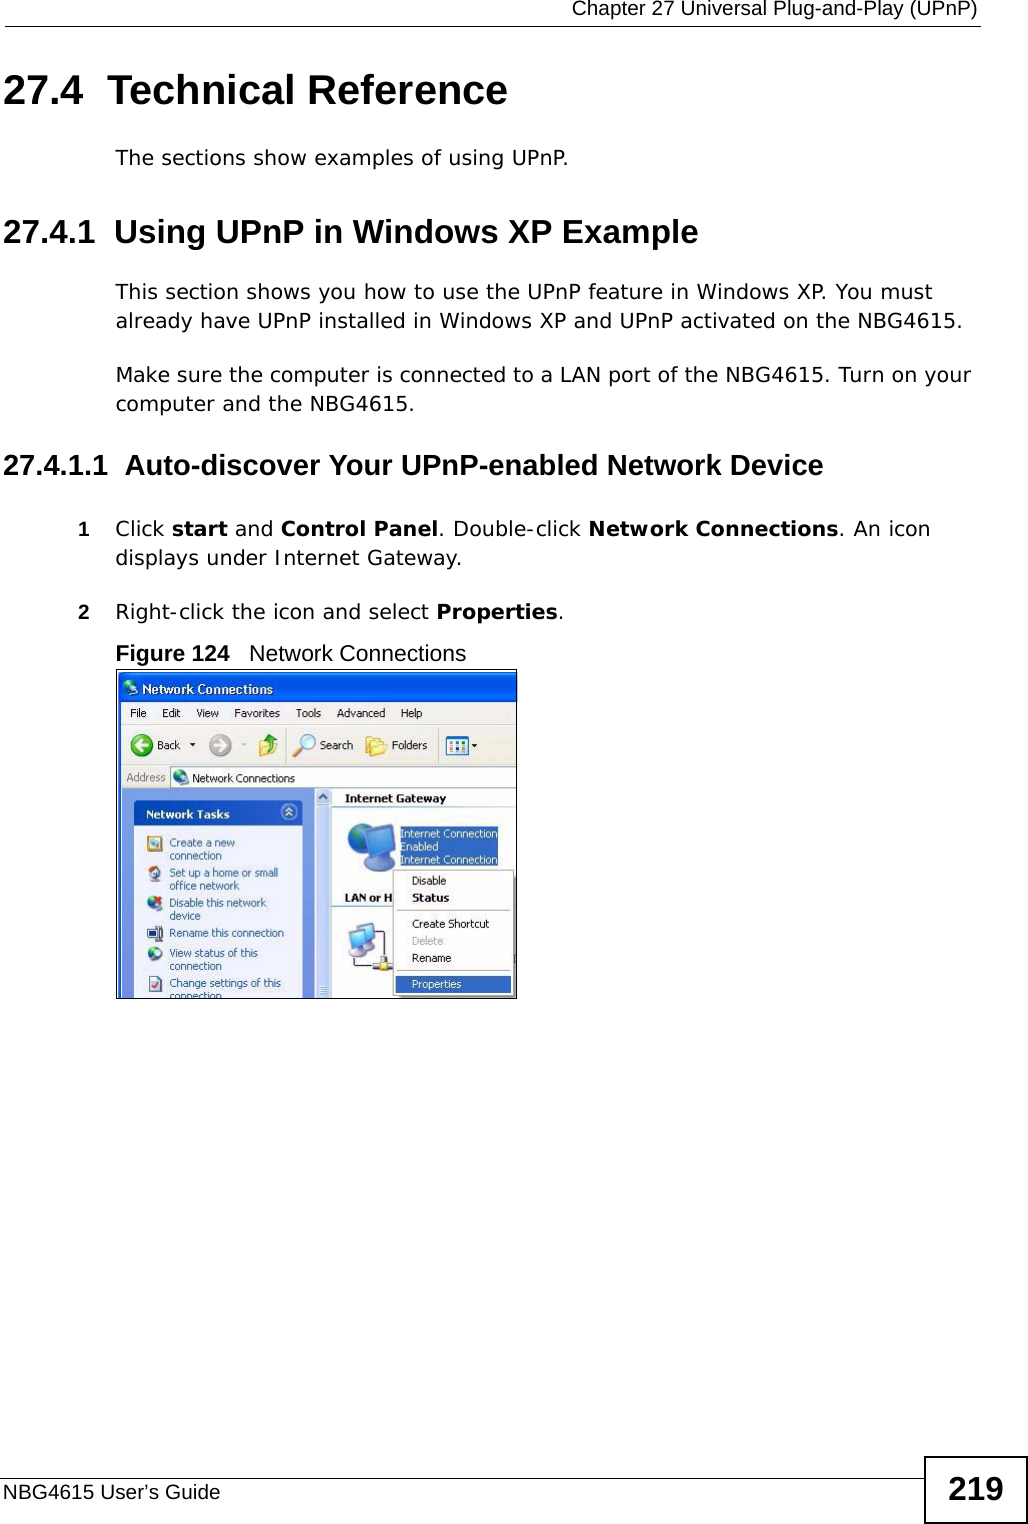  Chapter 27 Universal Plug-and-Play (UPnP)NBG4615 User’s Guide 21927.4  Technical ReferenceThe sections show examples of using UPnP. 27.4.1  Using UPnP in Windows XP ExampleThis section shows you how to use the UPnP feature in Windows XP. You must already have UPnP installed in Windows XP and UPnP activated on the NBG4615.Make sure the computer is connected to a LAN port of the NBG4615. Turn on your computer and the NBG4615. 27.4.1.1  Auto-discover Your UPnP-enabled Network Device1Click start and Control Panel. Double-click Network Connections. An icon displays under Internet Gateway.2Right-click the icon and select Properties. Figure 124   Network Connections